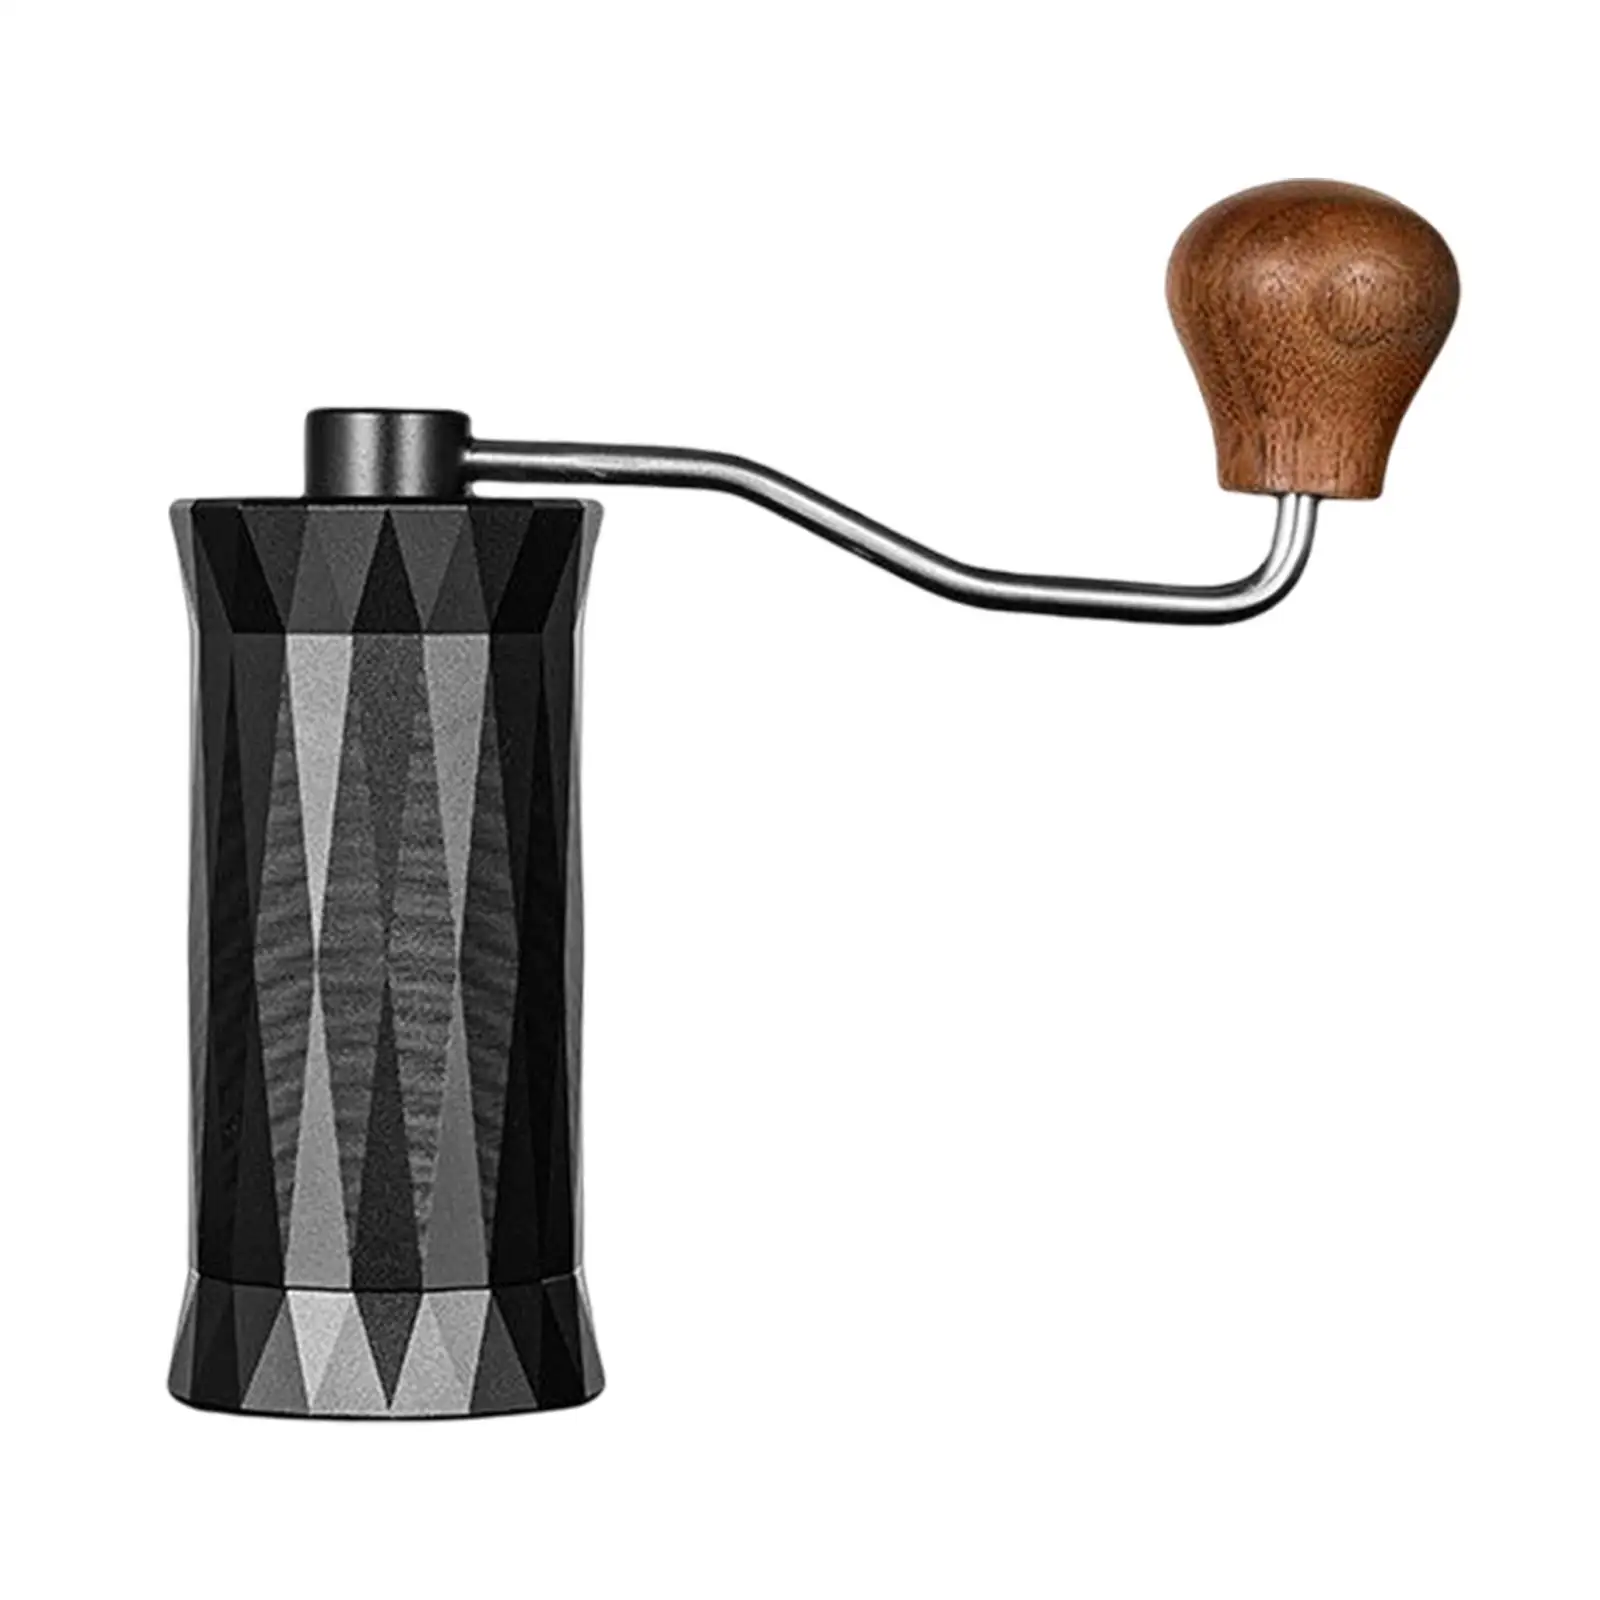 Handheld Manual Coffee Grinder with Adjustable Coarseness Settings Manual Coffee Mill for Home